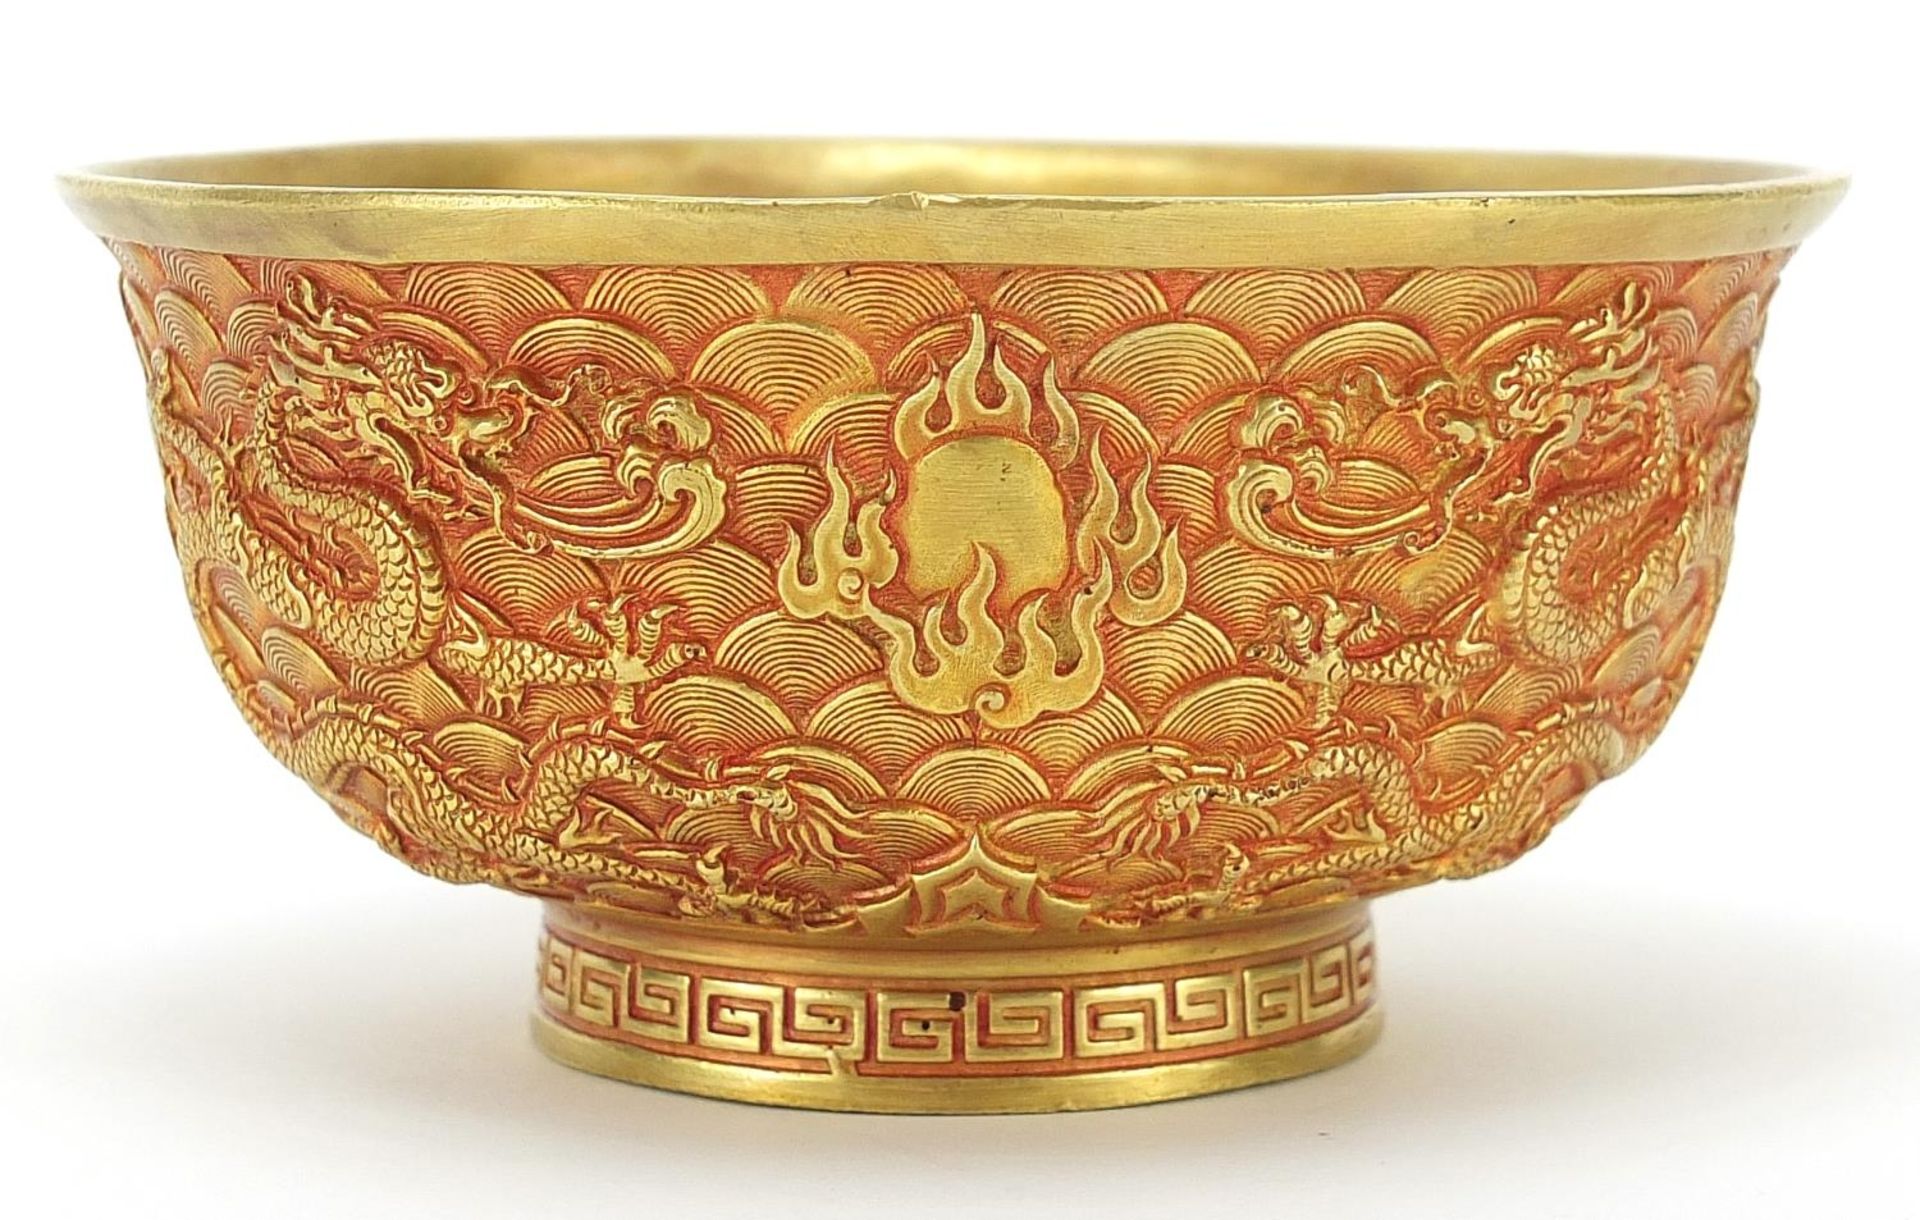 Chinese gilt bronze footed bowl cast with dragons amongst clouds chasing flaming pearls, four figure